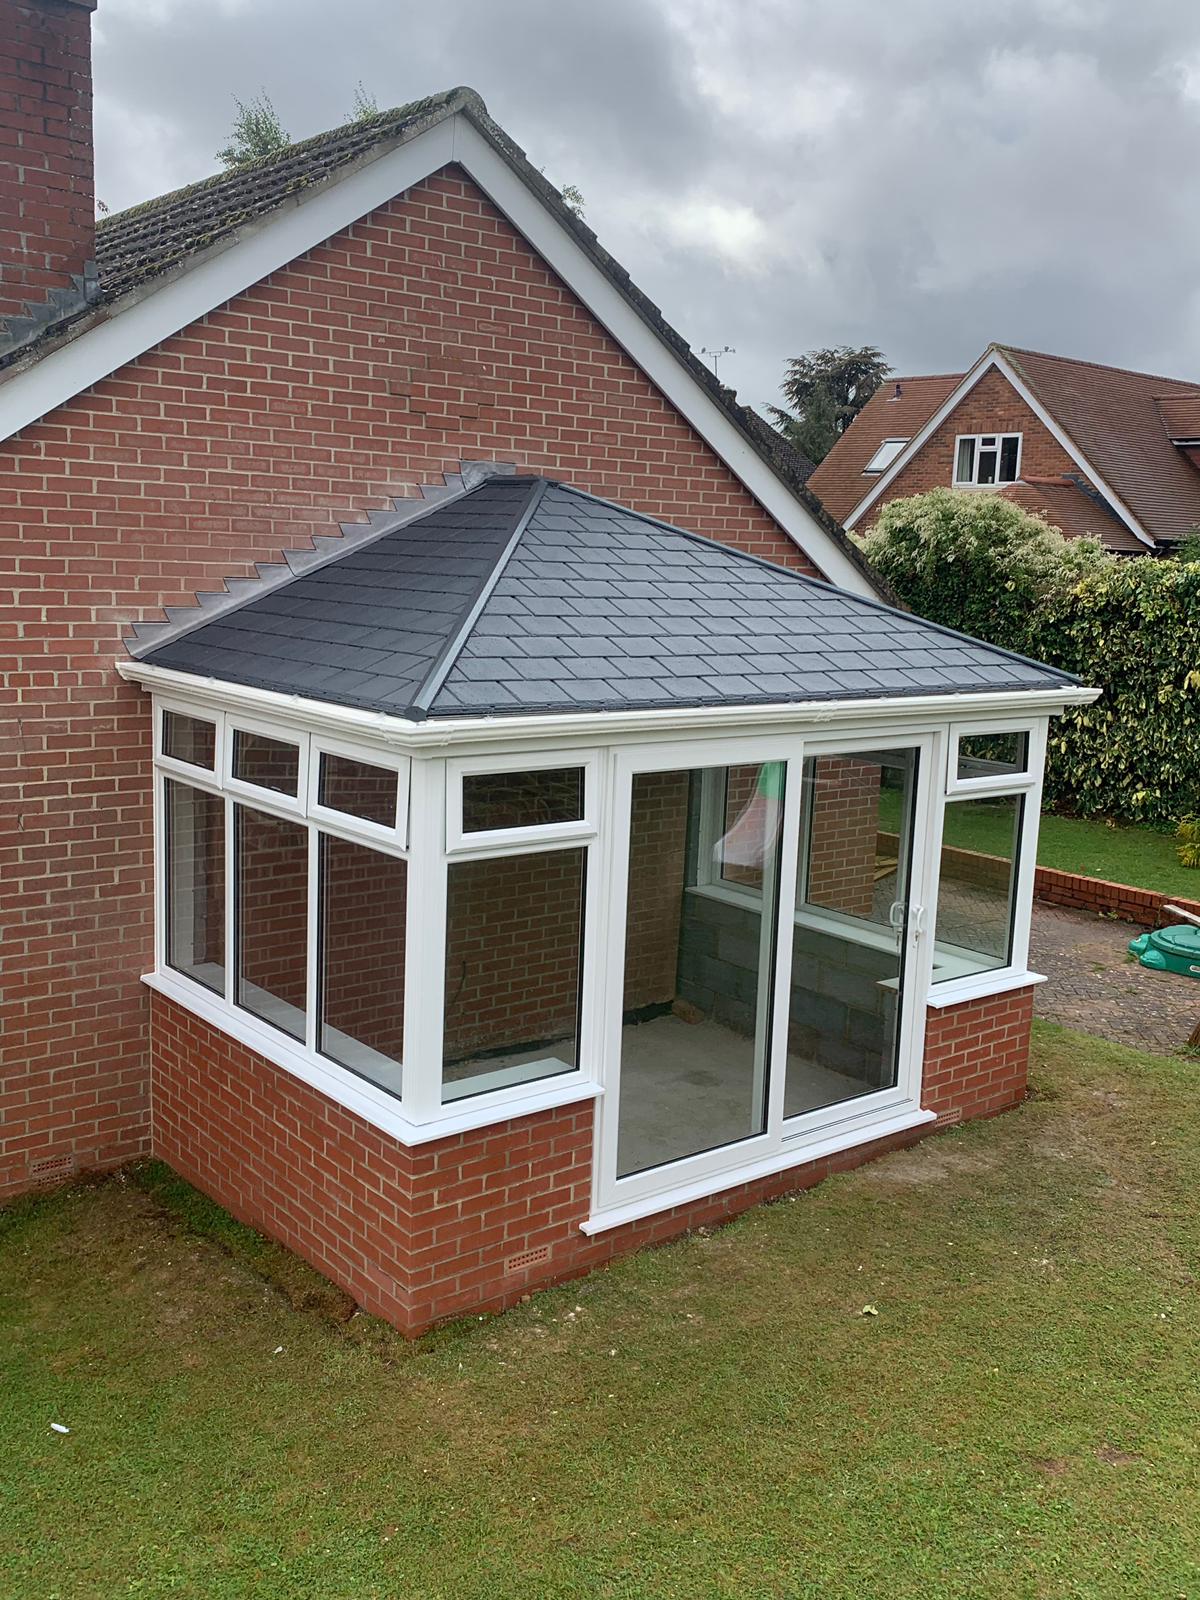 High angle image of a new conservatory design.